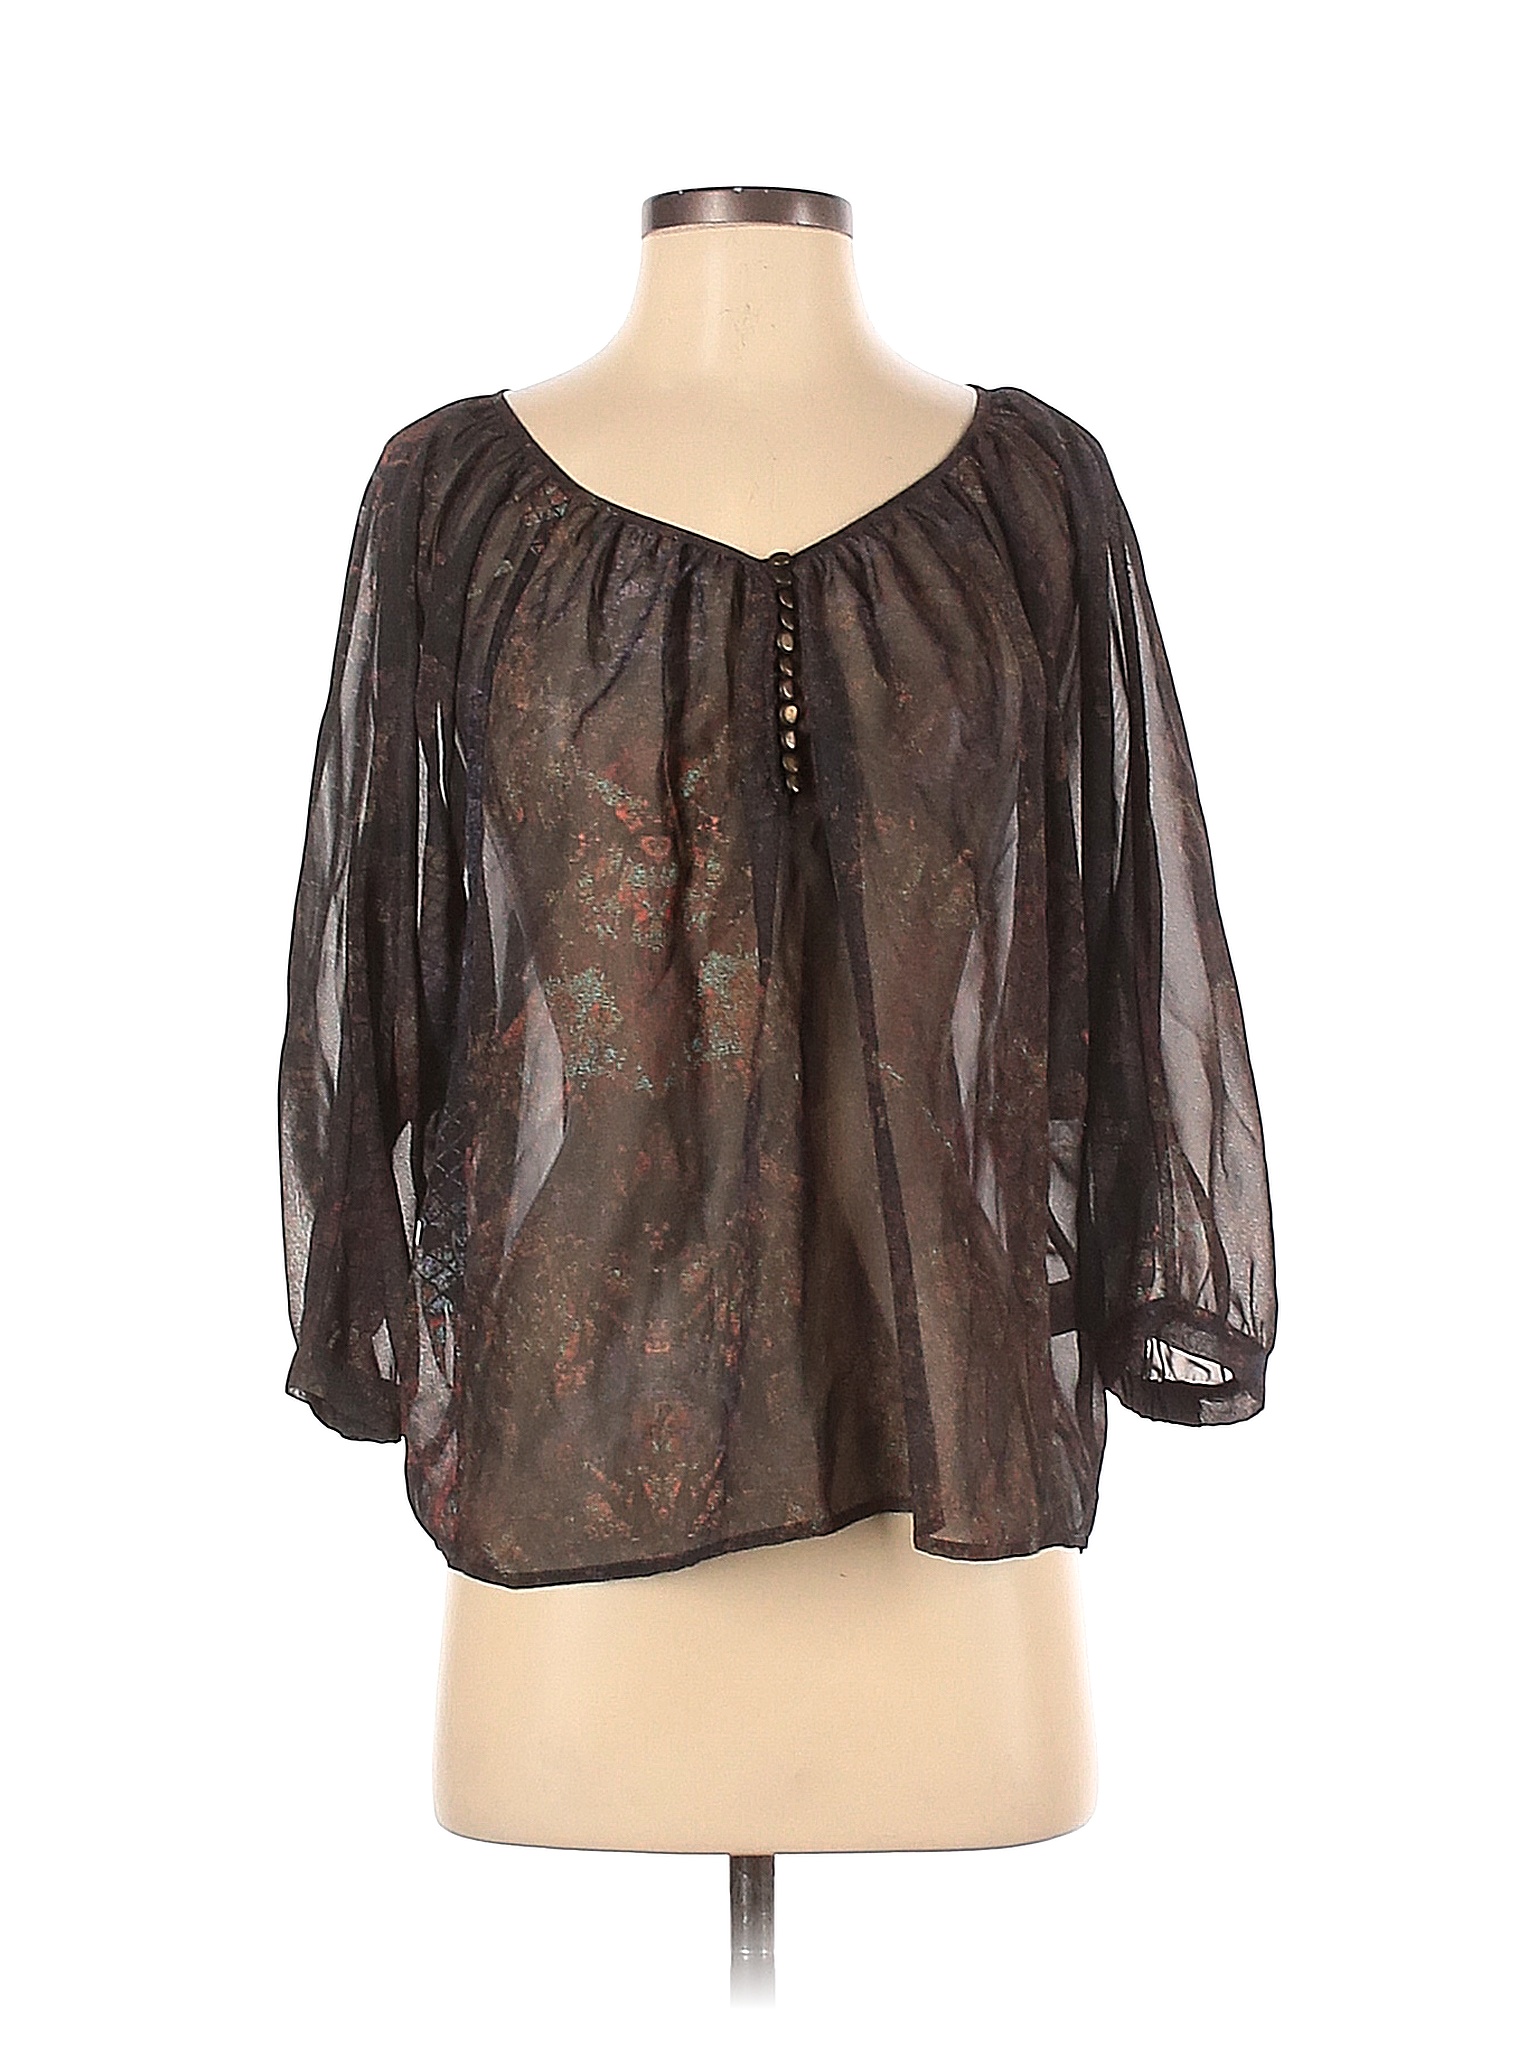 Twelfth Street by Cynthia Vincent Black Lace Front Blouse Top New 3/4 Sleeve 